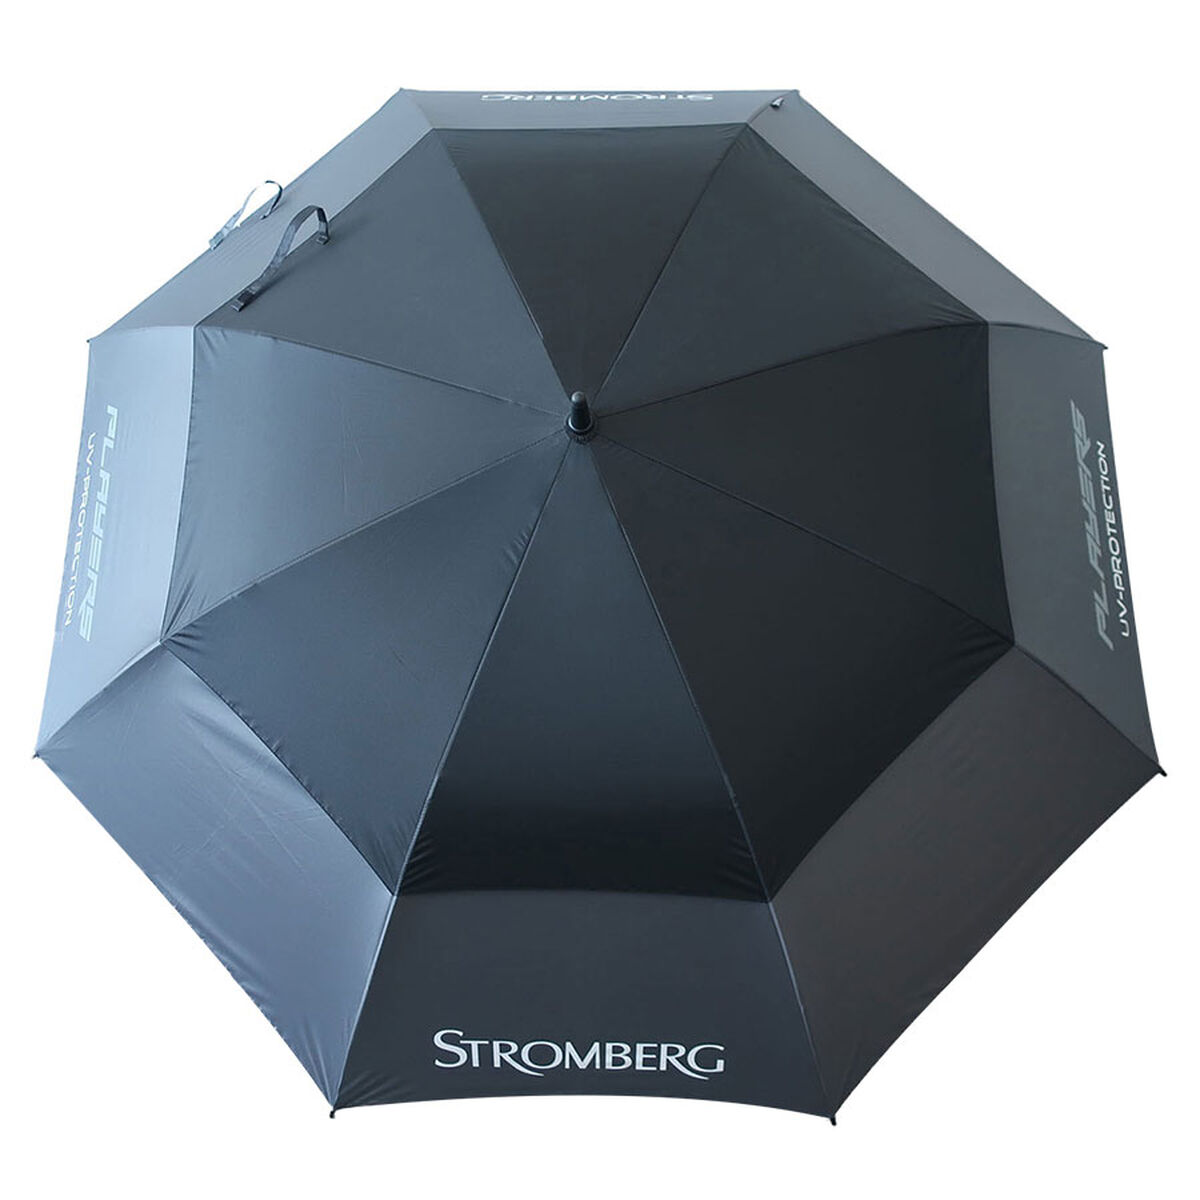 Stromberg Golf Umbrella, 68"" Double Canopy, Mens, Black/charcoal, 68 inches | American Golf